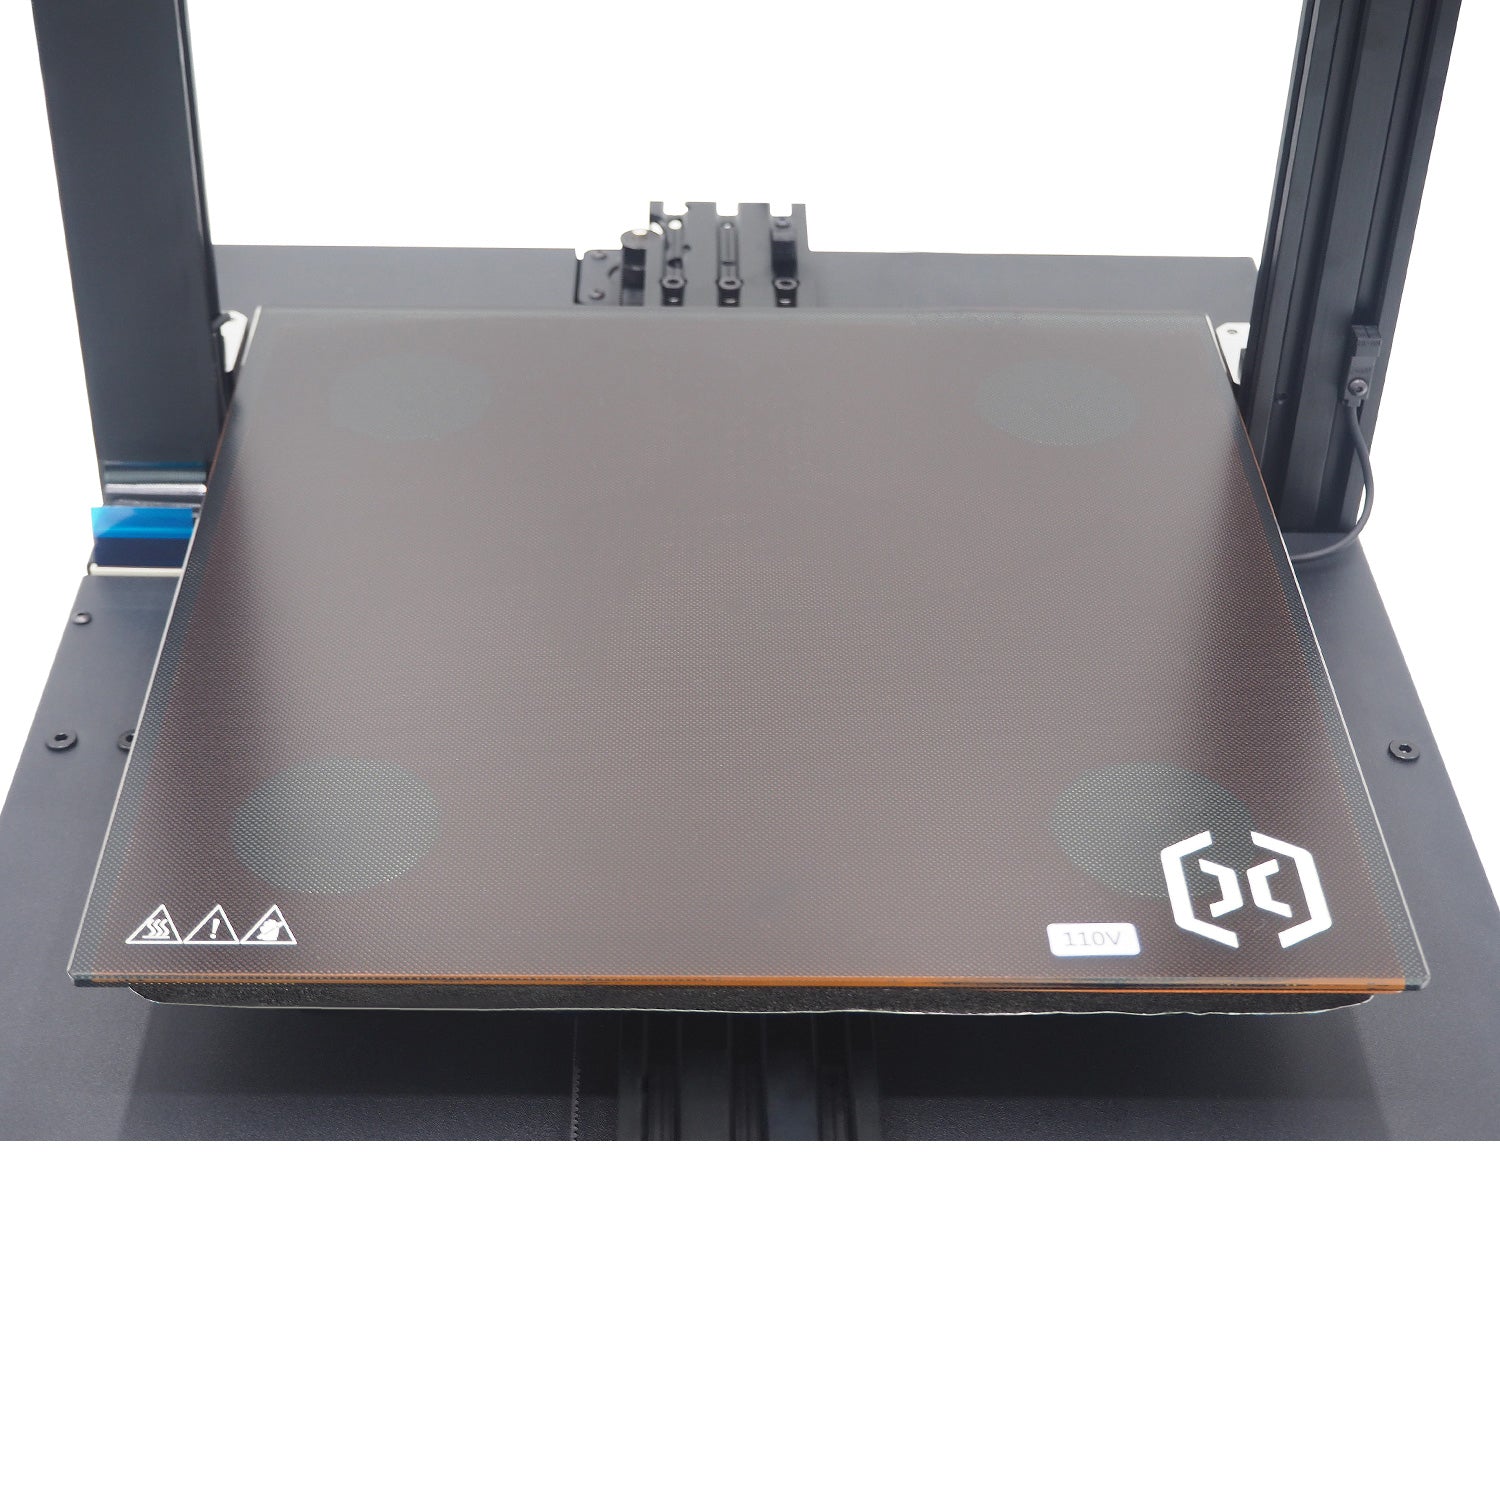 Light Slate Gray Artillery® Sidewinder X1 3D Printer Kit with 300*300*400mm Large Print Size Support Resume Printing&Filament Runout Detection With Dual Z axis/TFT Touch Screen